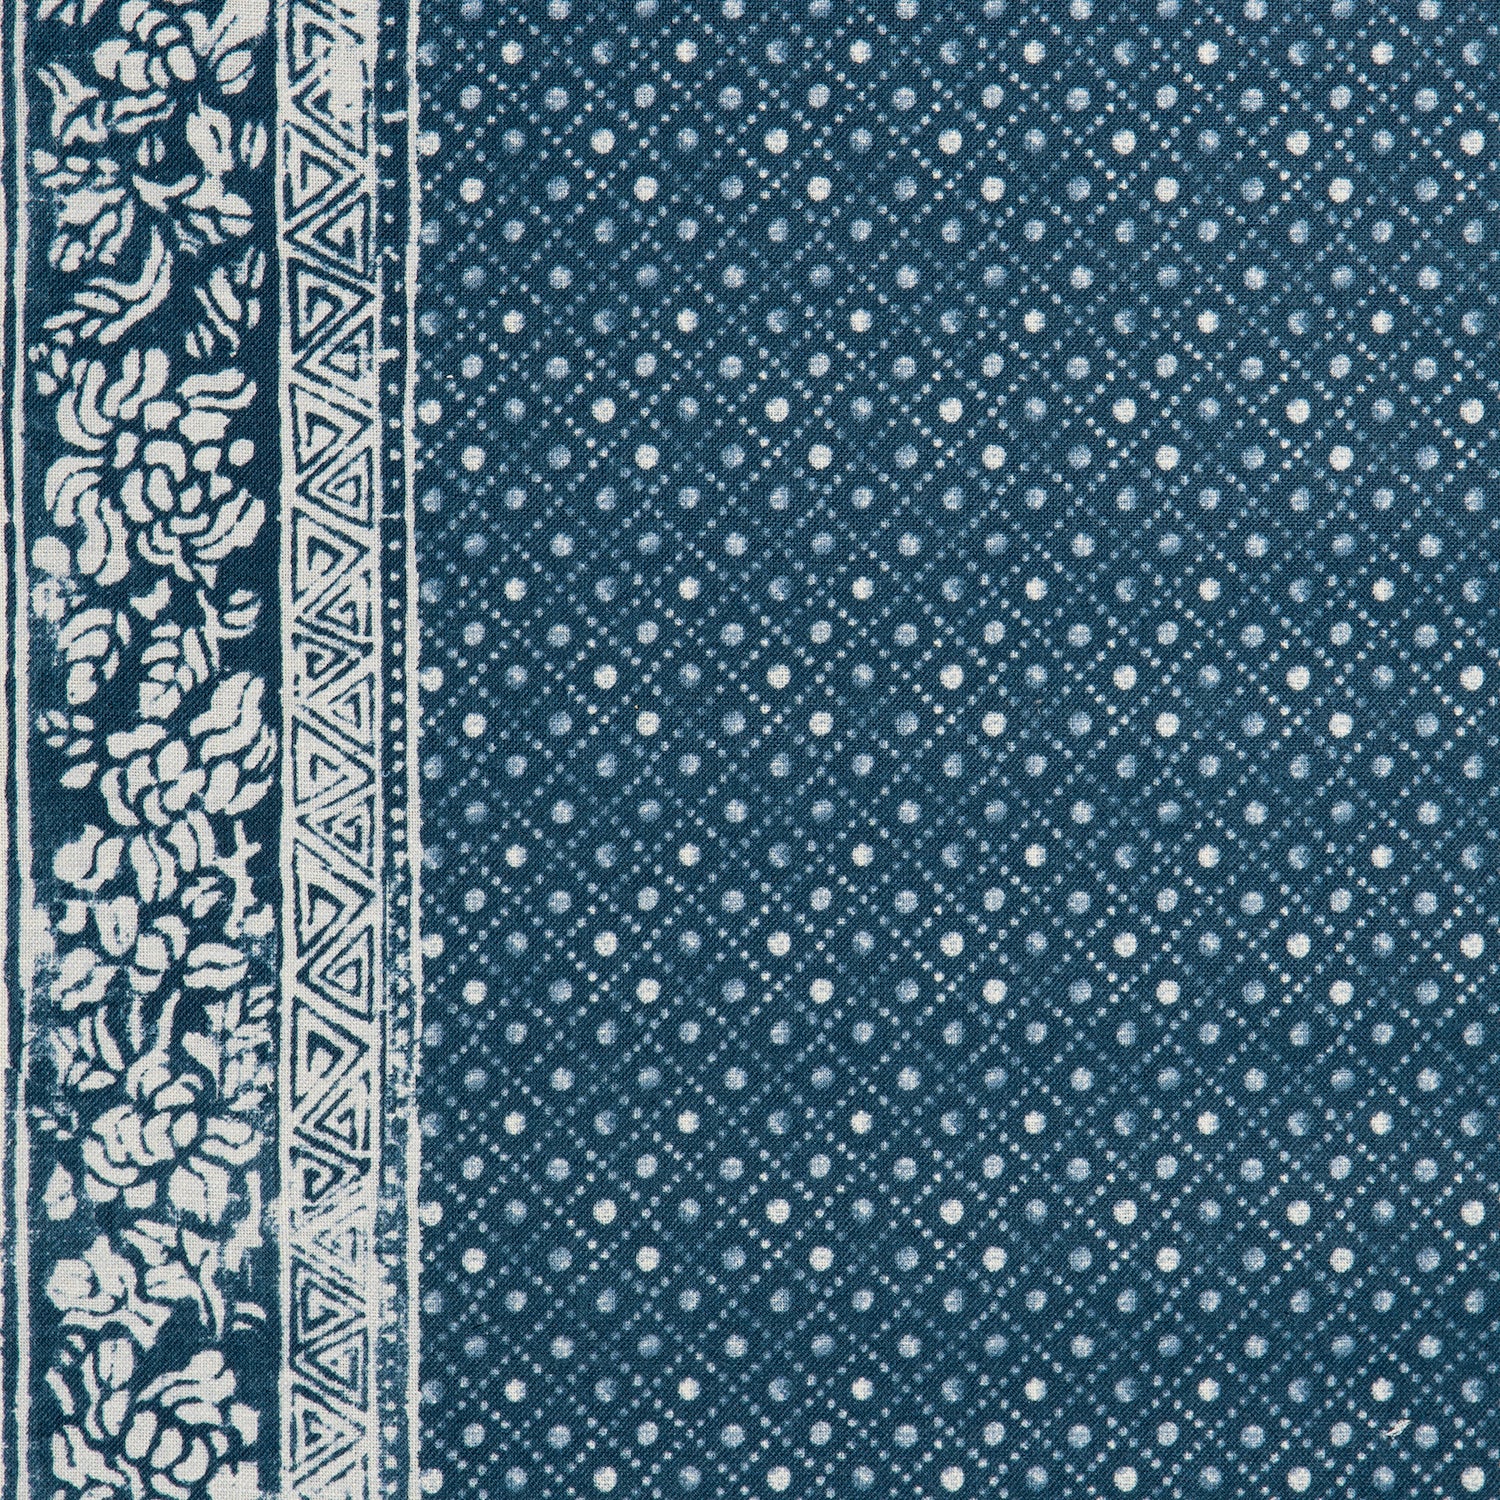 Detail of a linen fabric in a gridded dot pattern with a floral border in white on an indigo field.